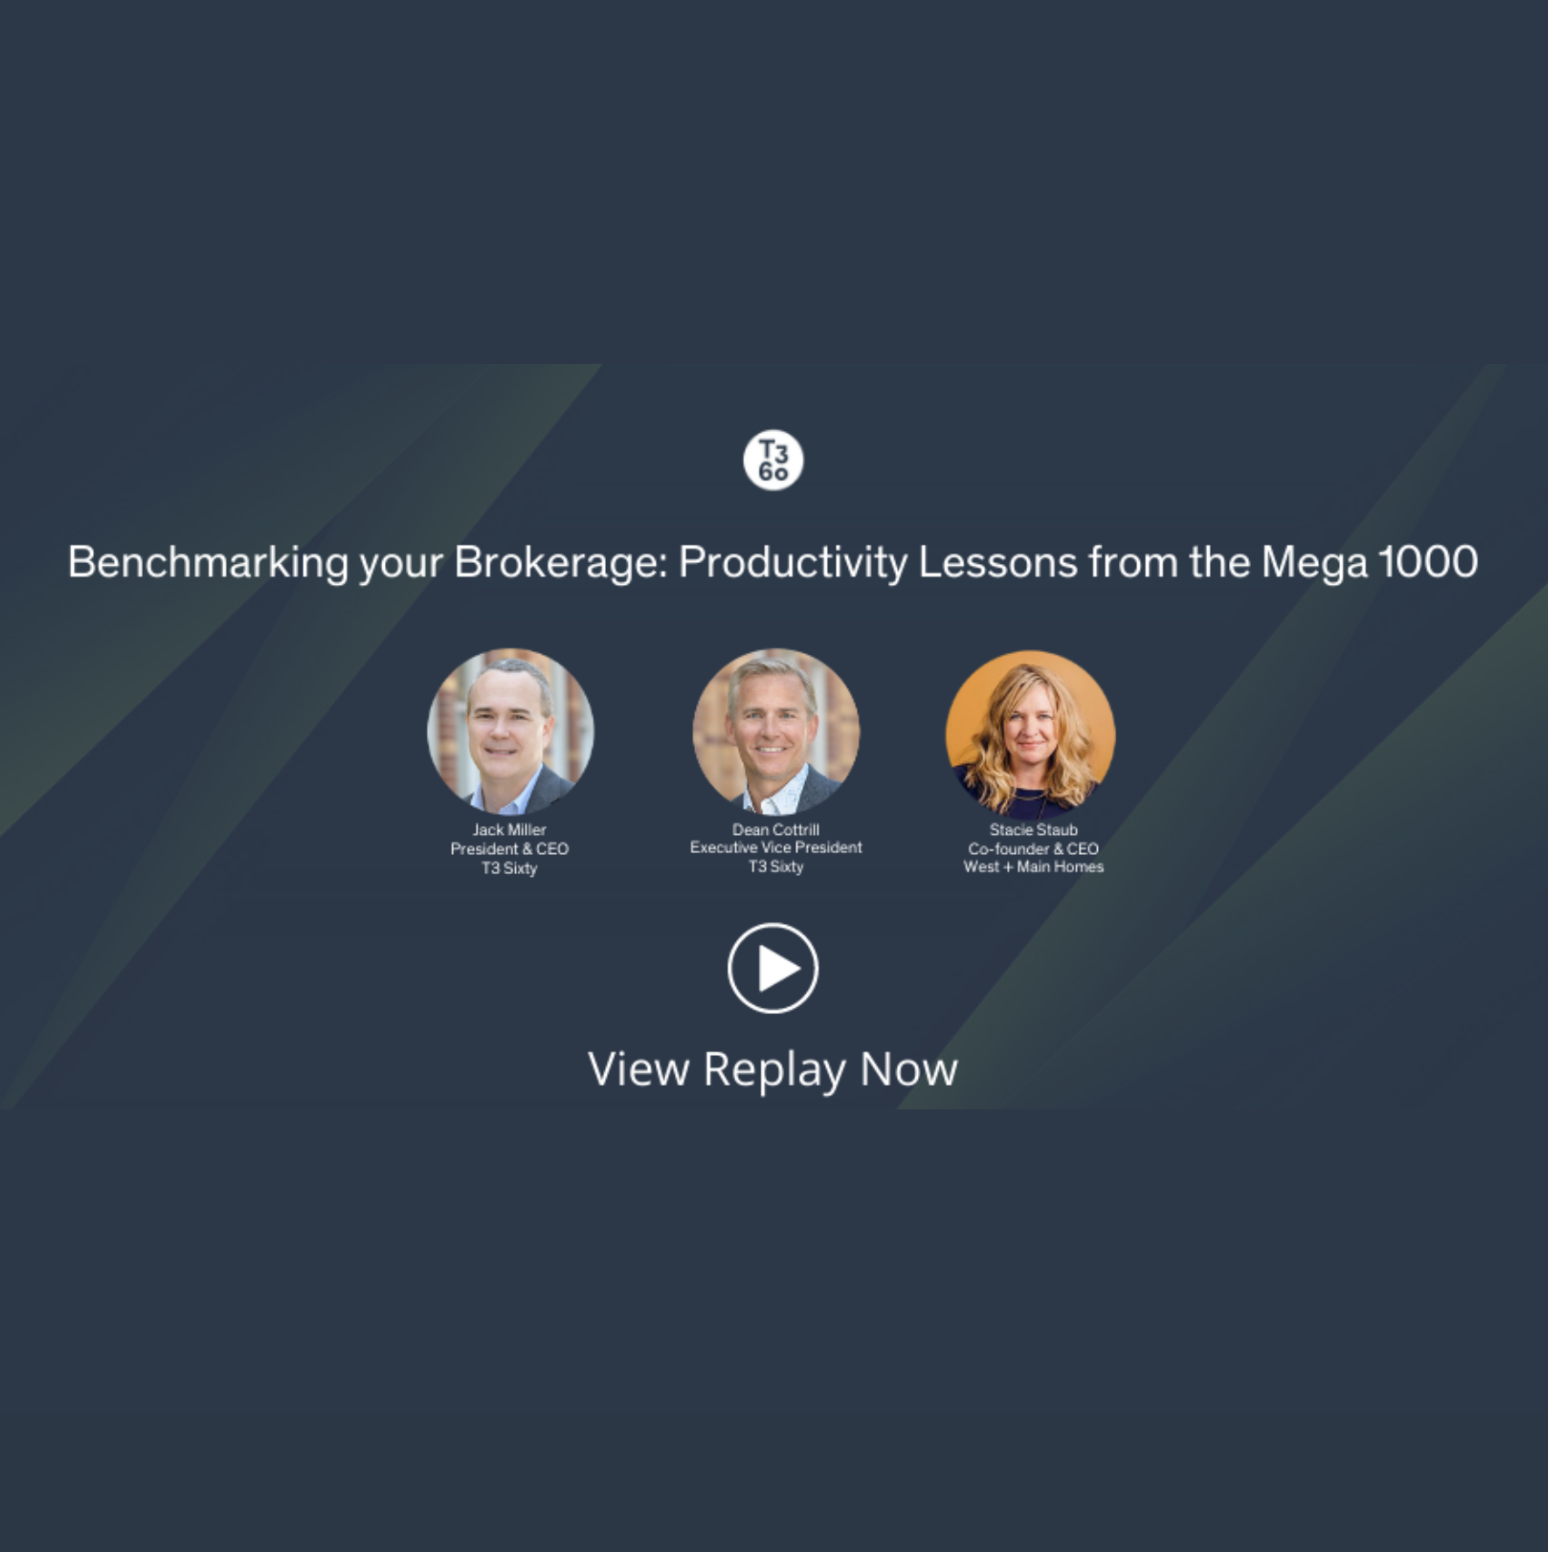 Benchmarking Your Brokerage: Productivity Lessons from the Mega 1000